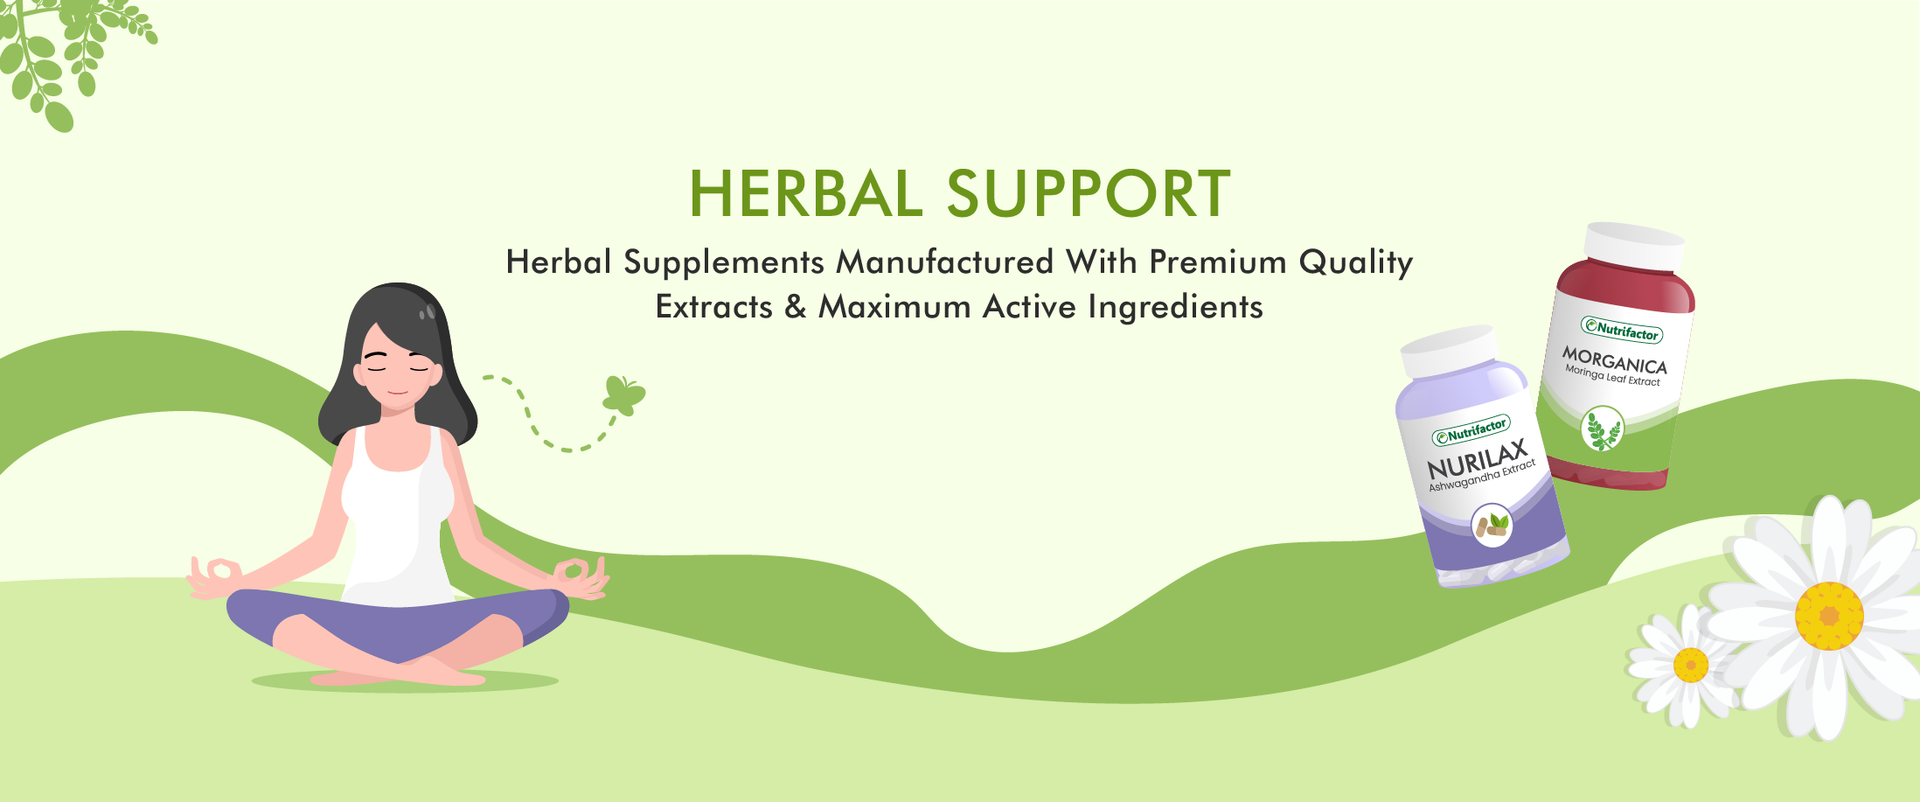 Herbal Support